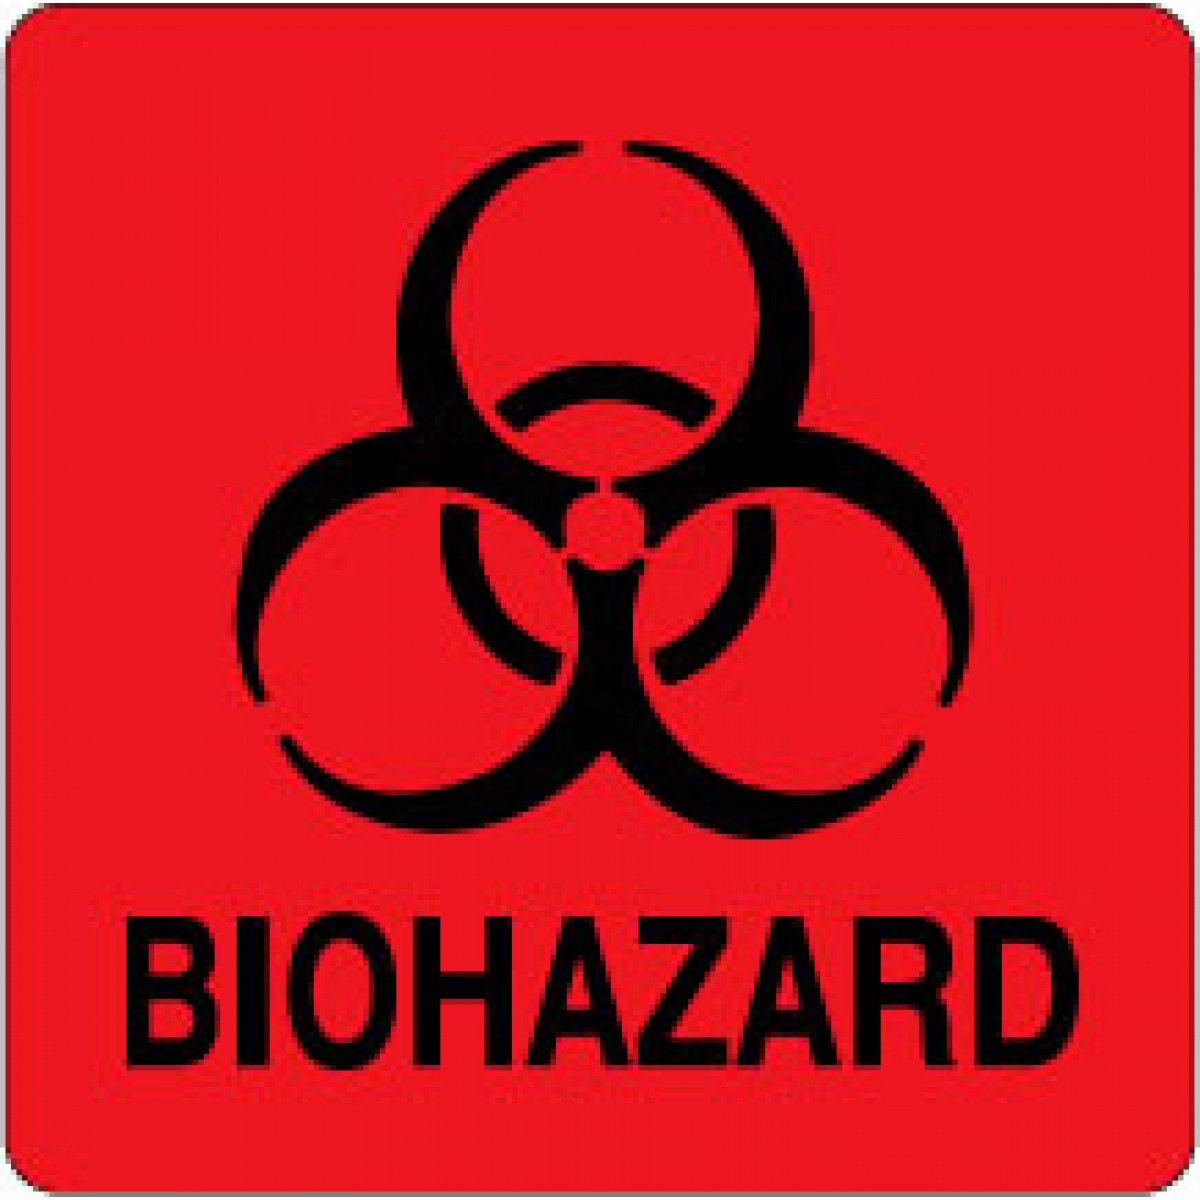 10 Red Biohazard Signs Free Cliparts That You Can Download To You